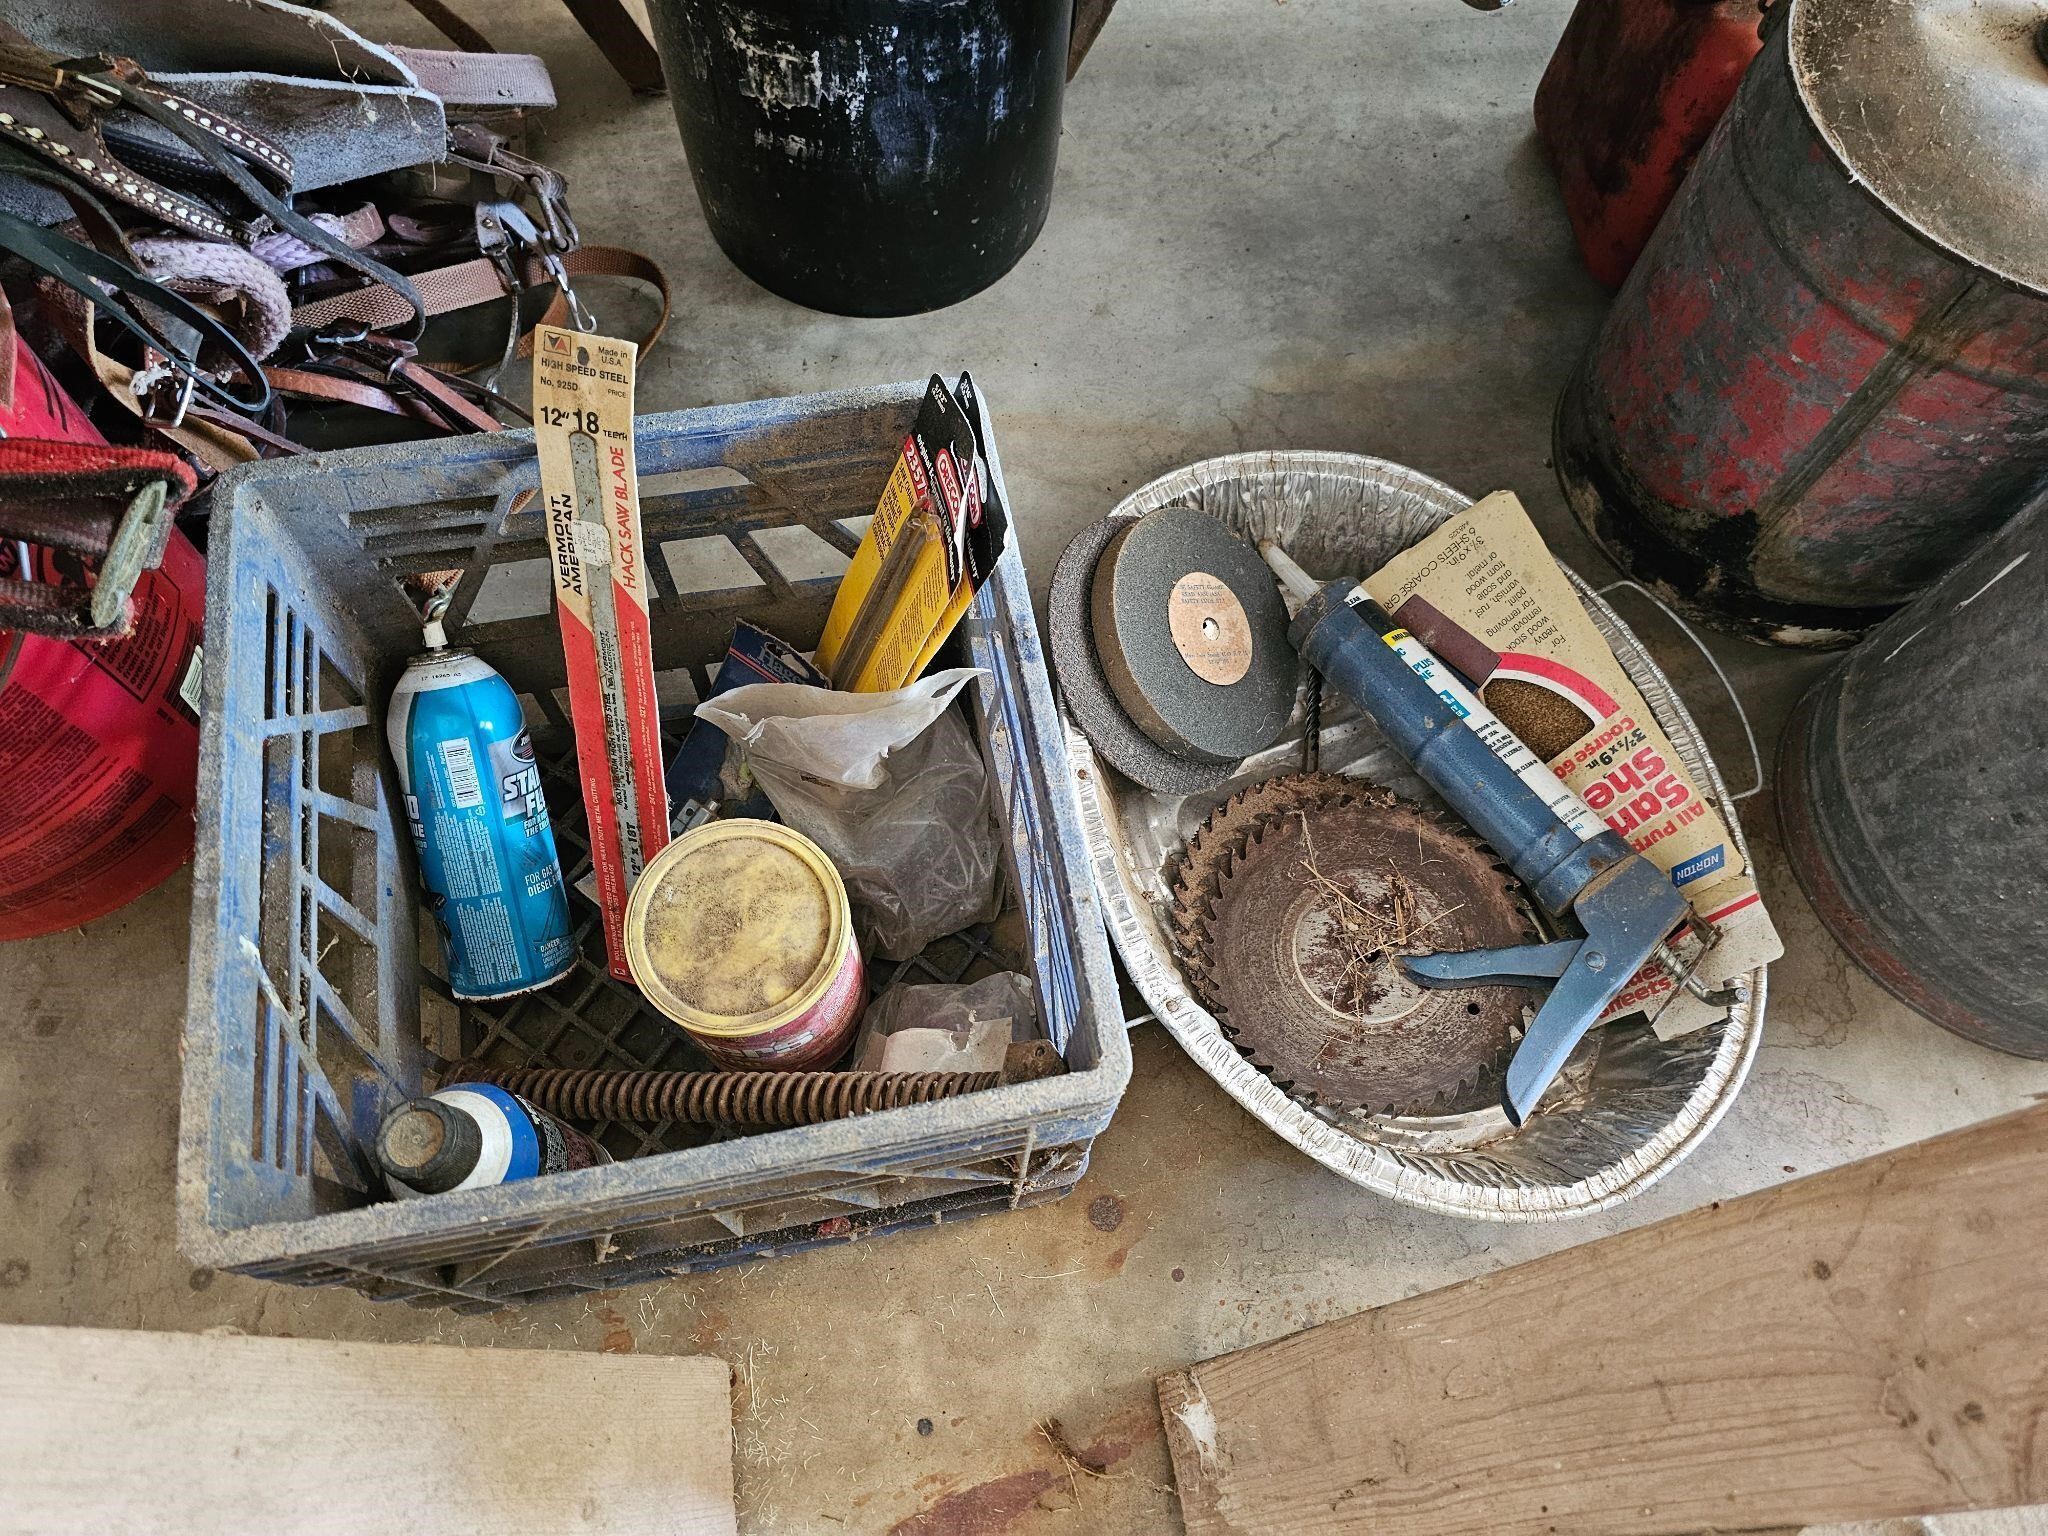 Lot of outside items